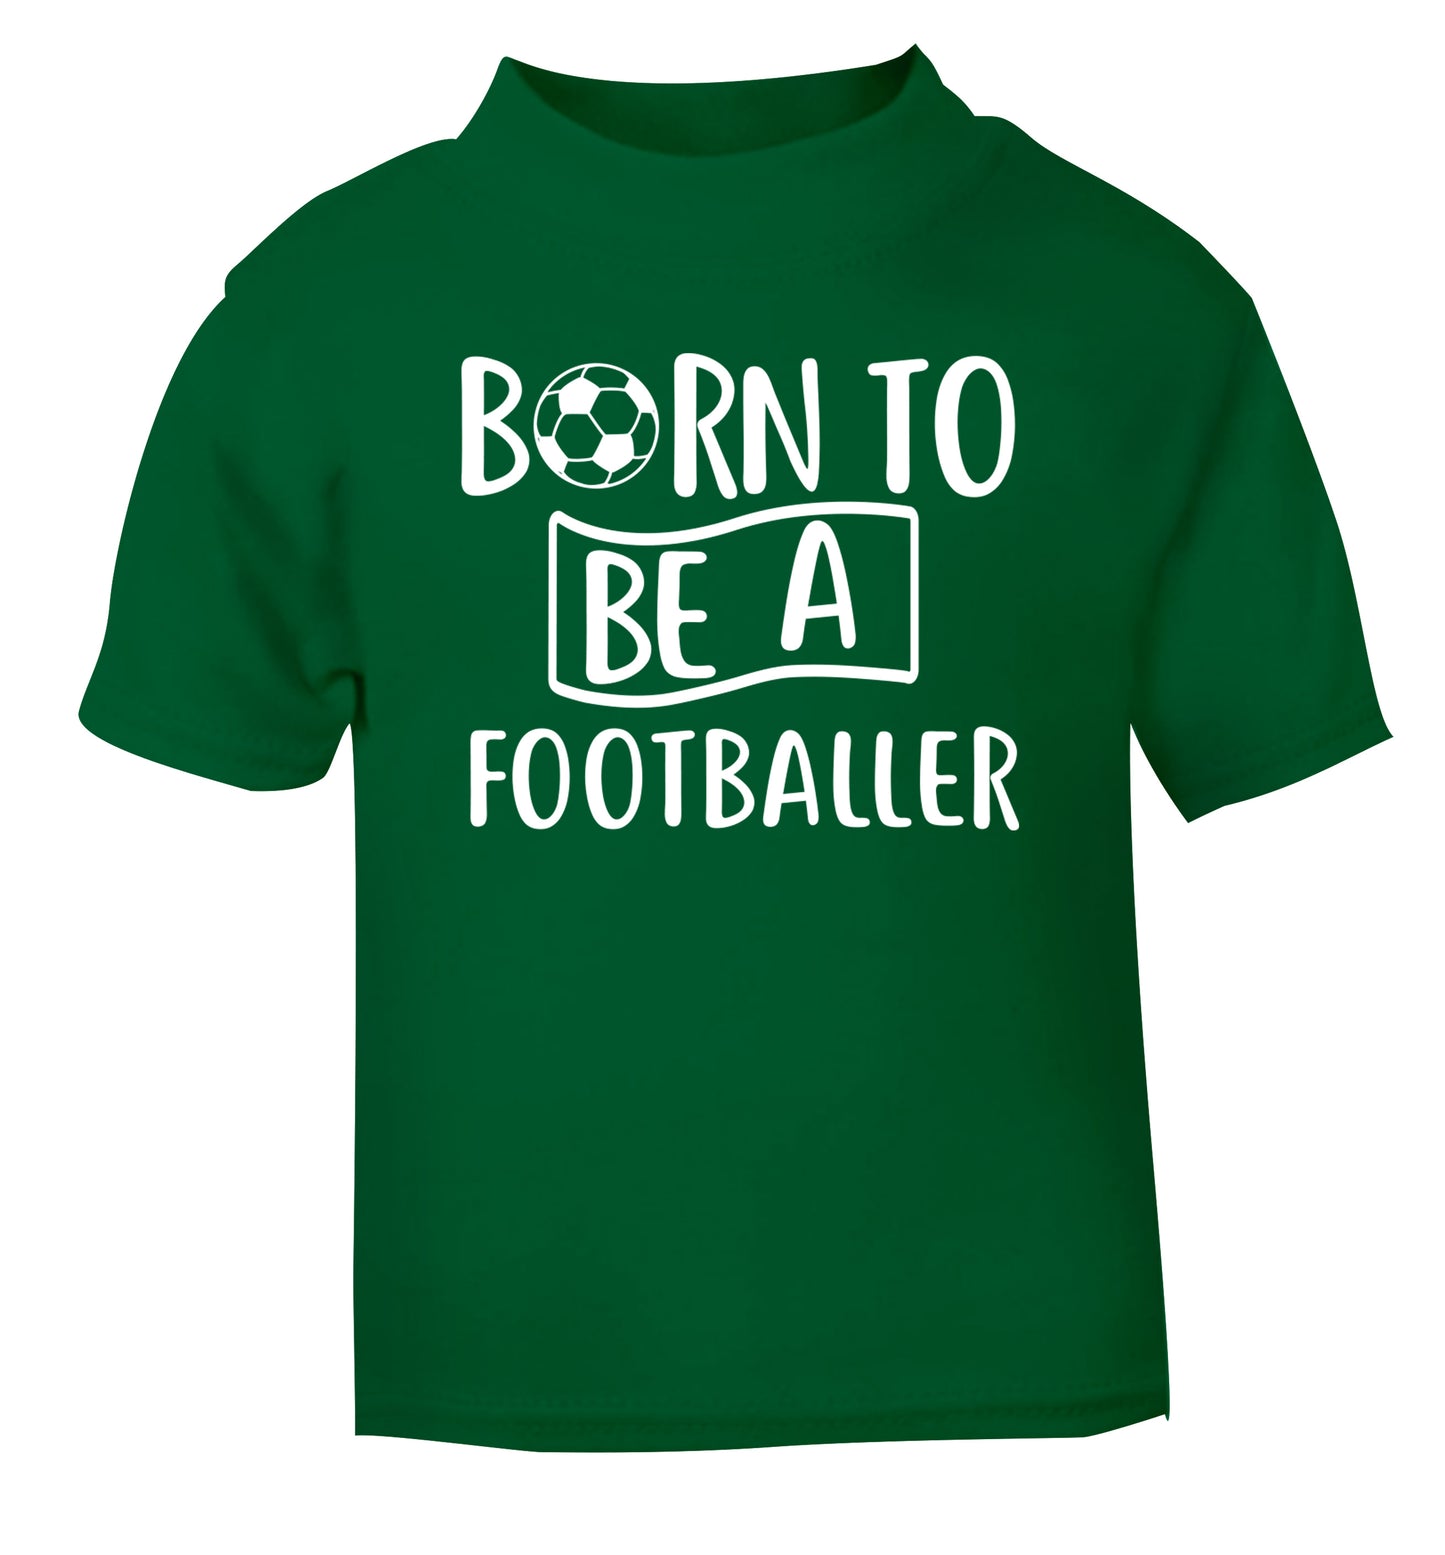 Born to be a footballer green Baby Toddler Tshirt 2 Years